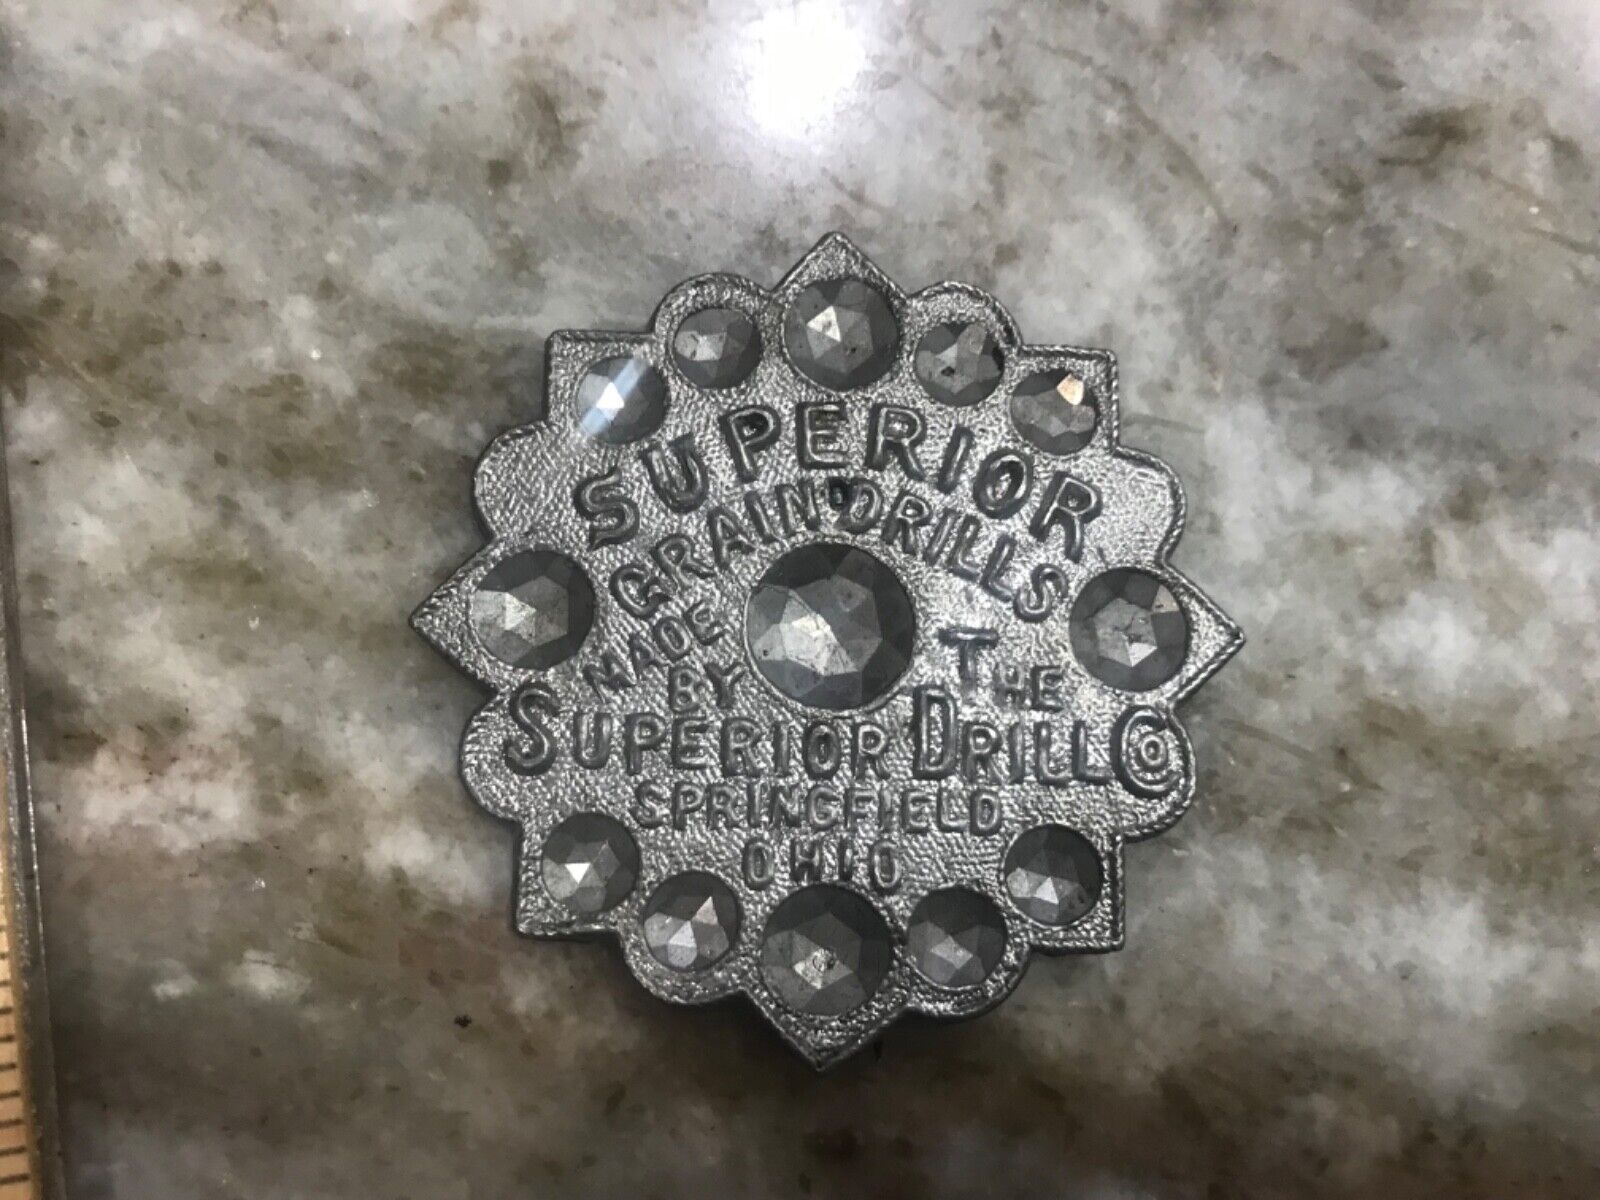 Early 1900’s metal badge .Superior Grain Drills, Springfield OH ..